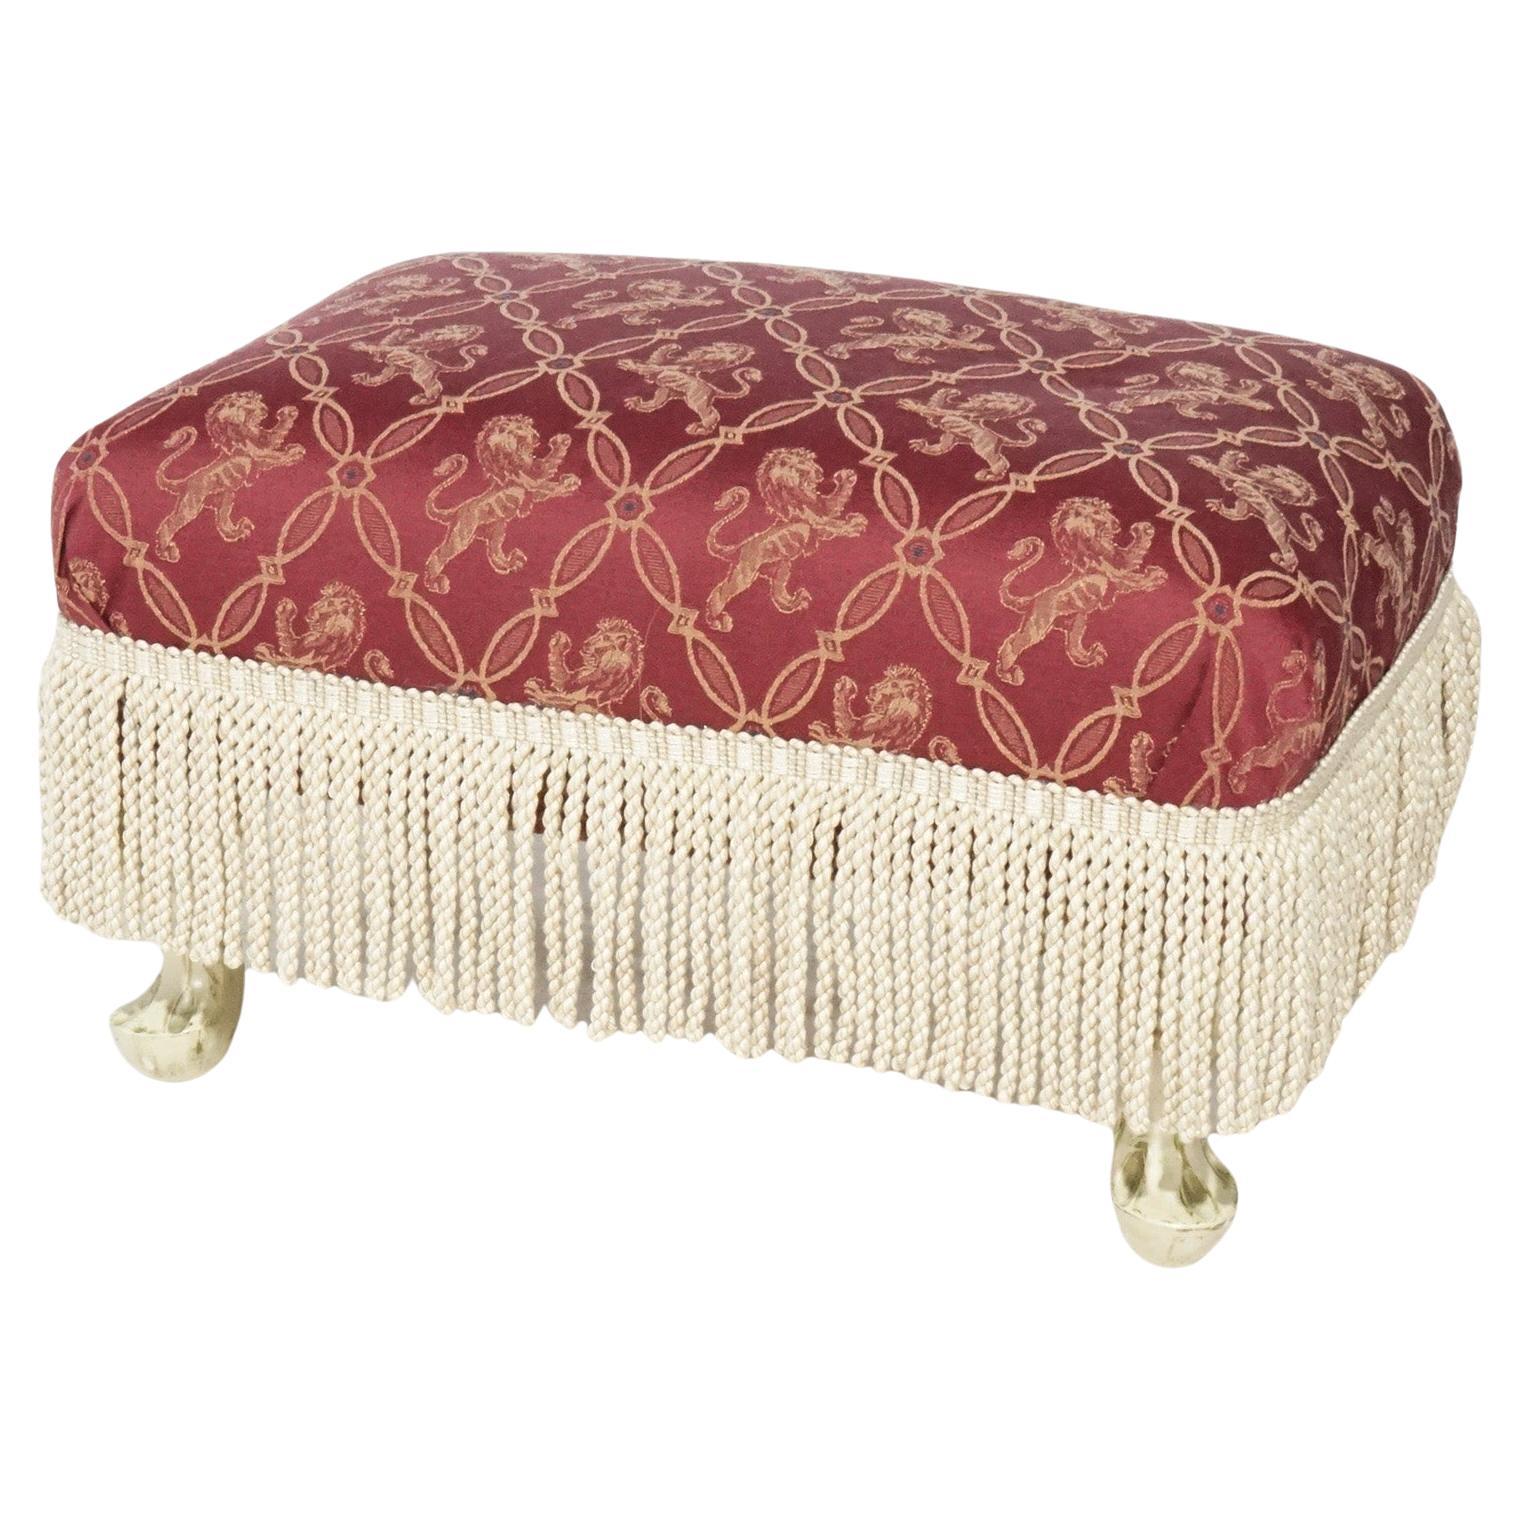 Antique French Country Style Upholstered Footstool, circa 1920 For Sale